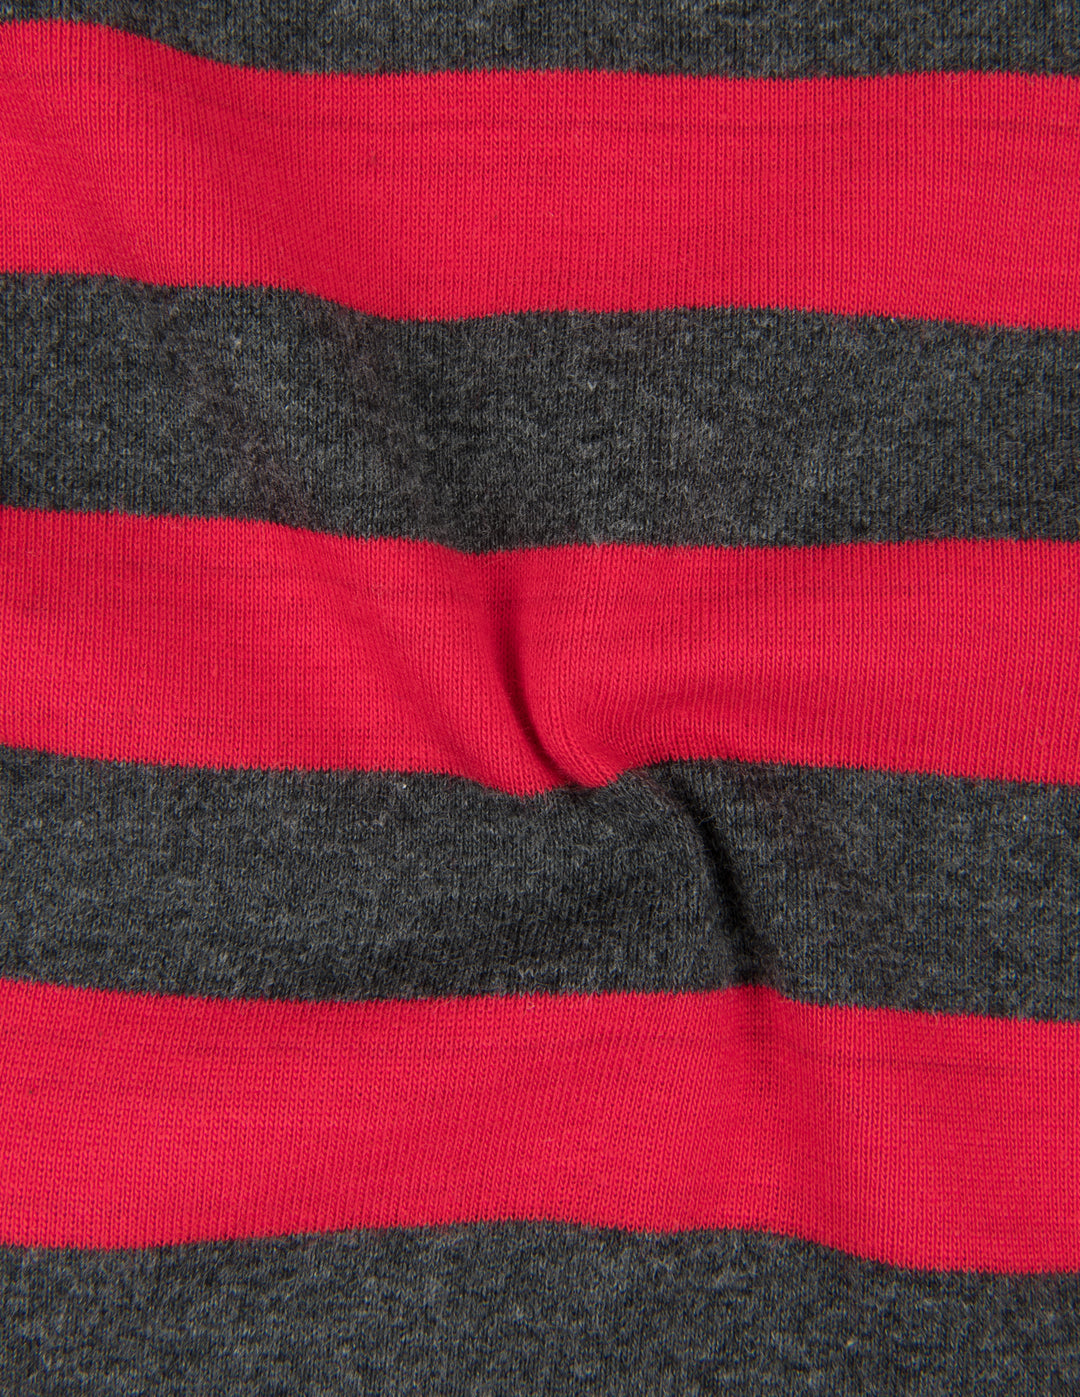 red and grey striped swatch